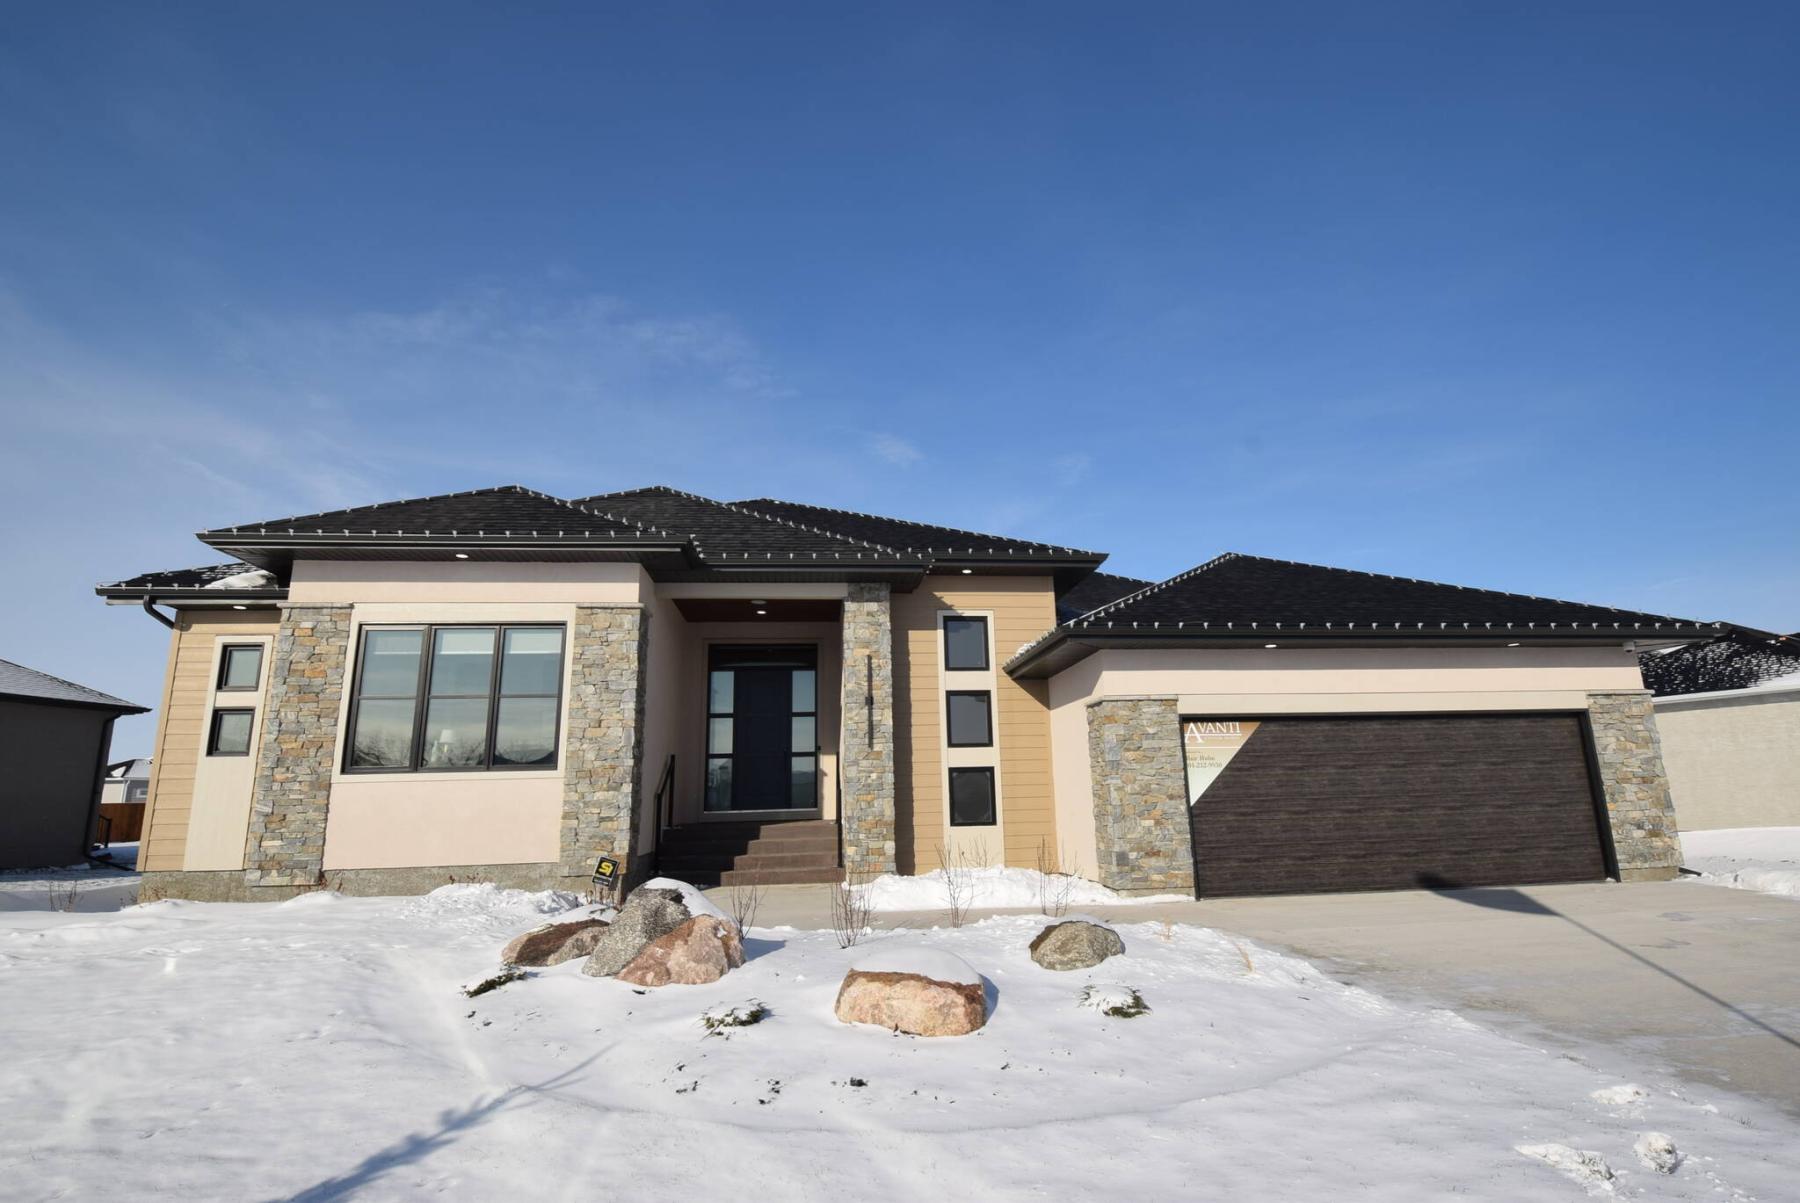  <p>Todd Lewys / Winnipeg Free Press</p>
                                <p>This large bungalow features a logical yet luxurious design that envelopes you with warmth, style and function.</p> 